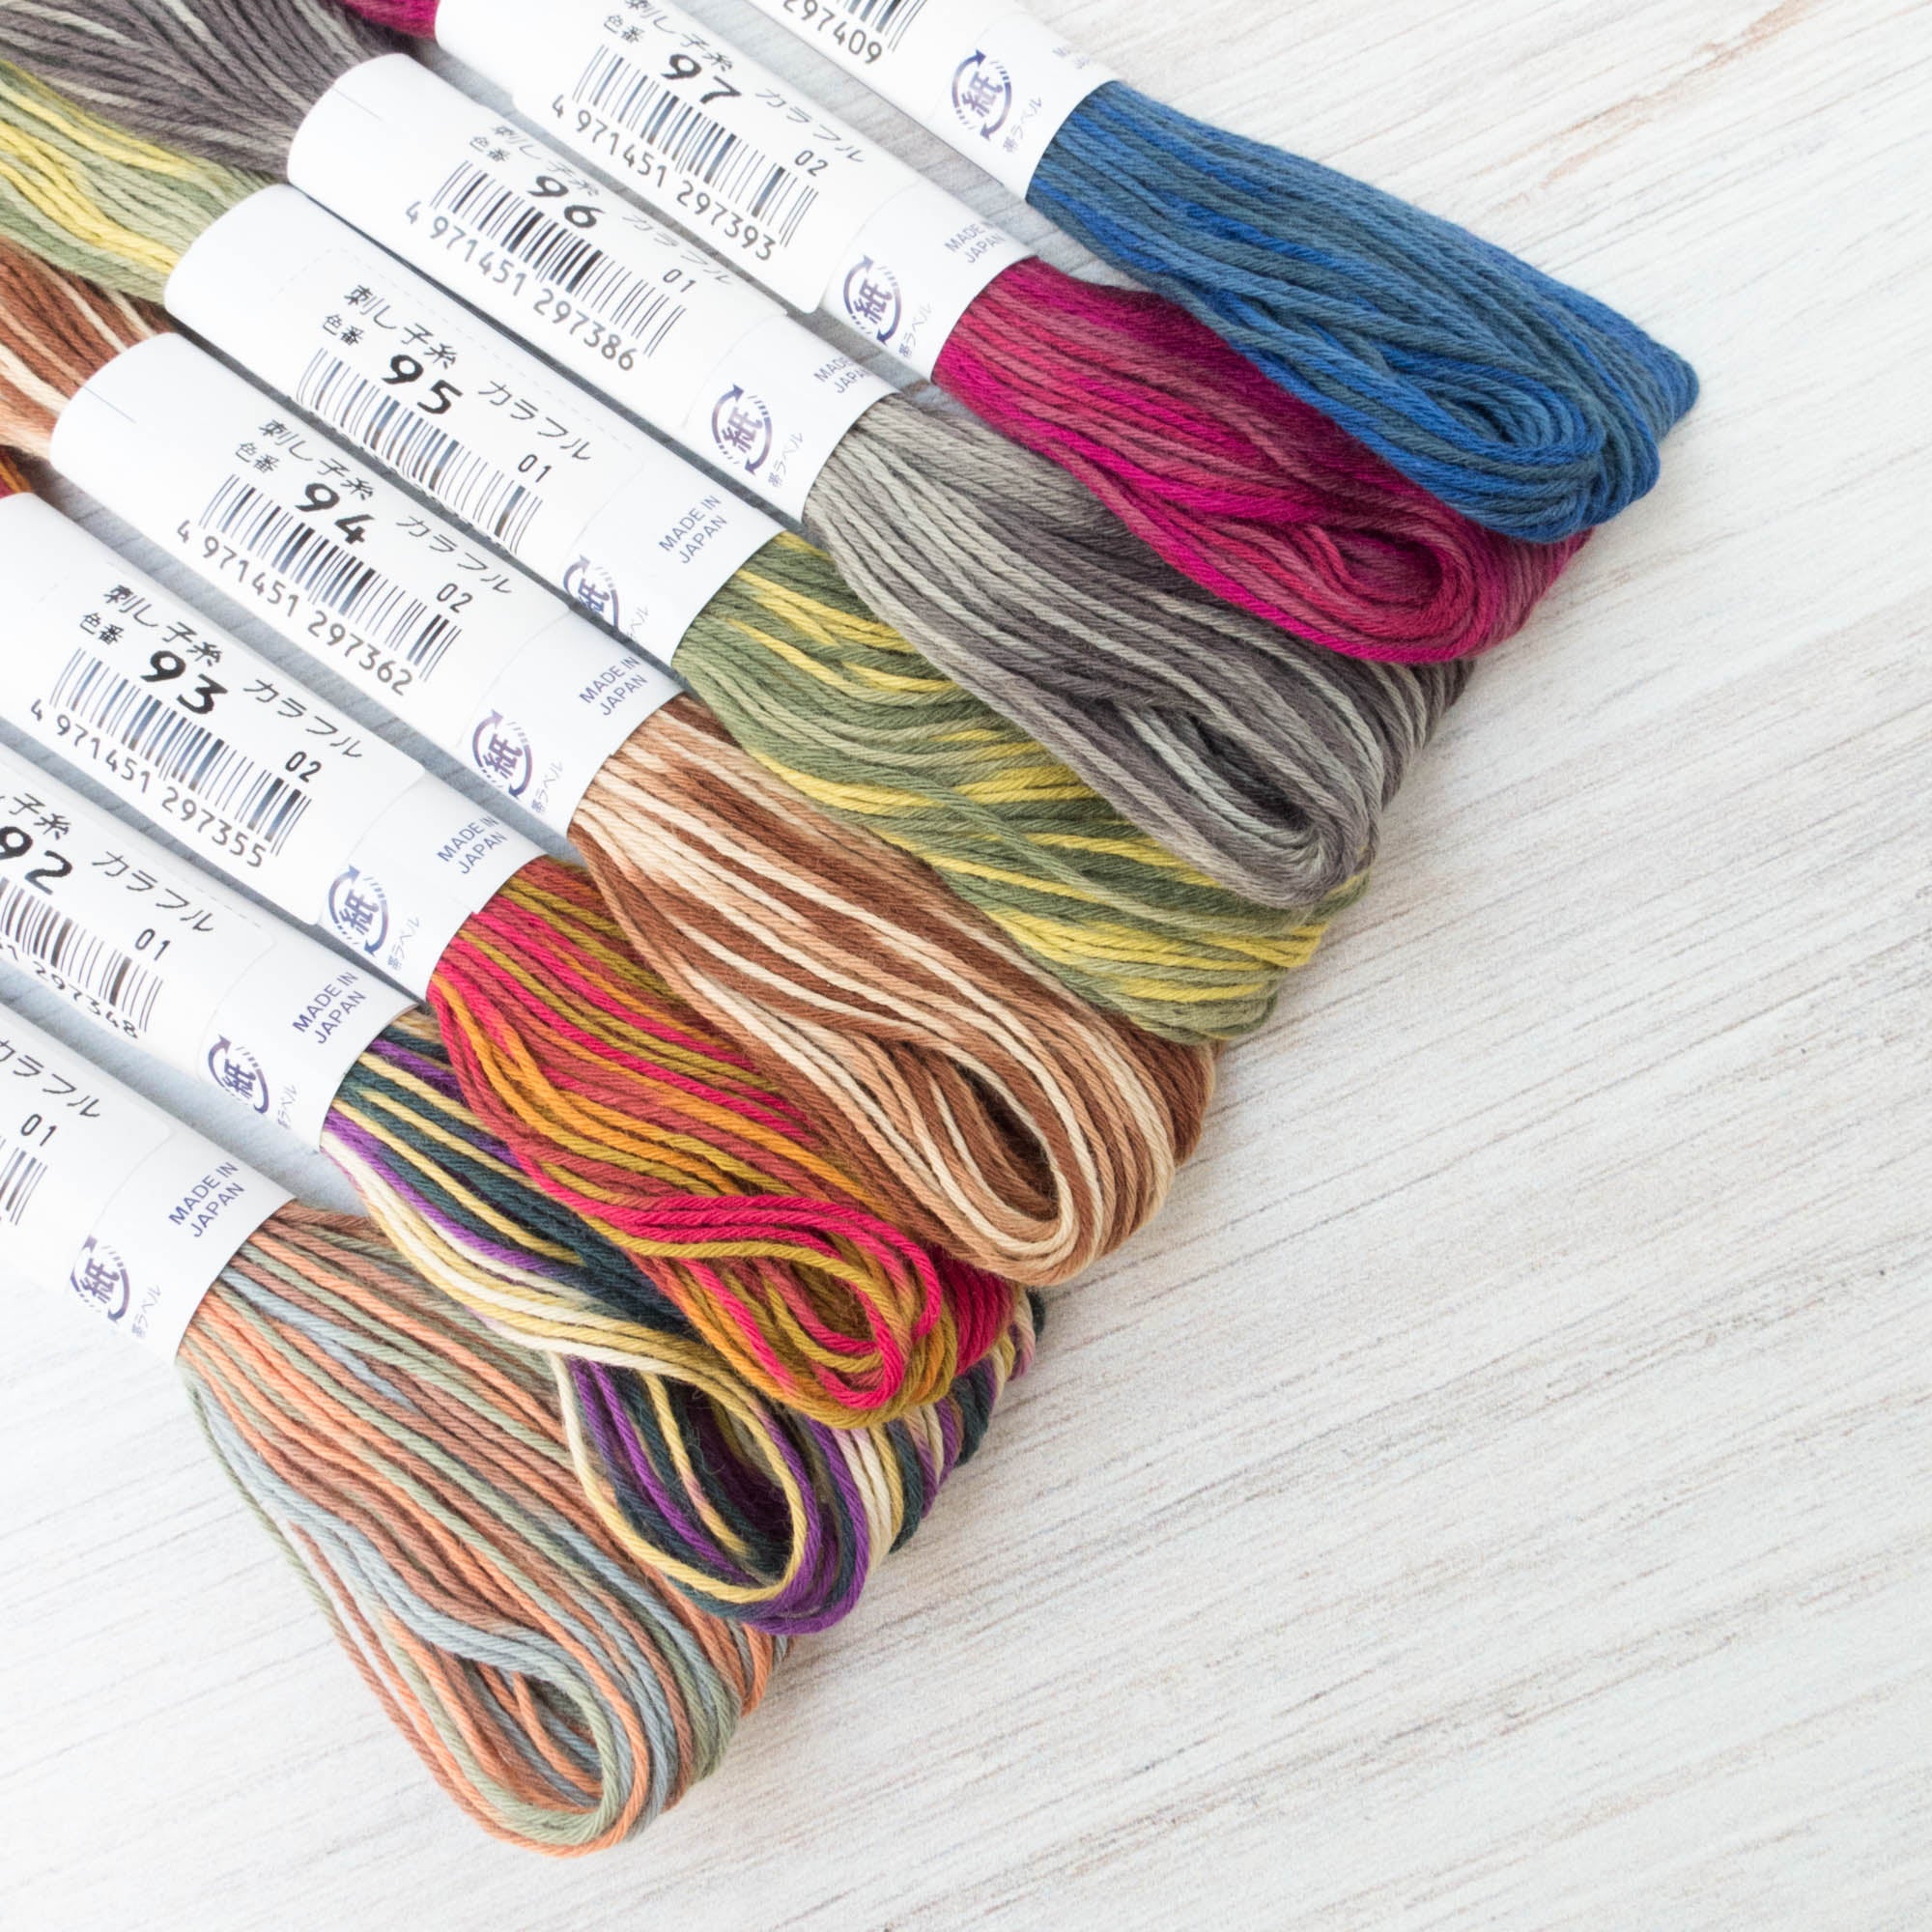 6 STRANDED COTTON, Hand Dyed Embroidery Thread, Cross Stitch Thread,  Variegated Thread, Canvaswork, Needlepoint, Sashiko Quilting 